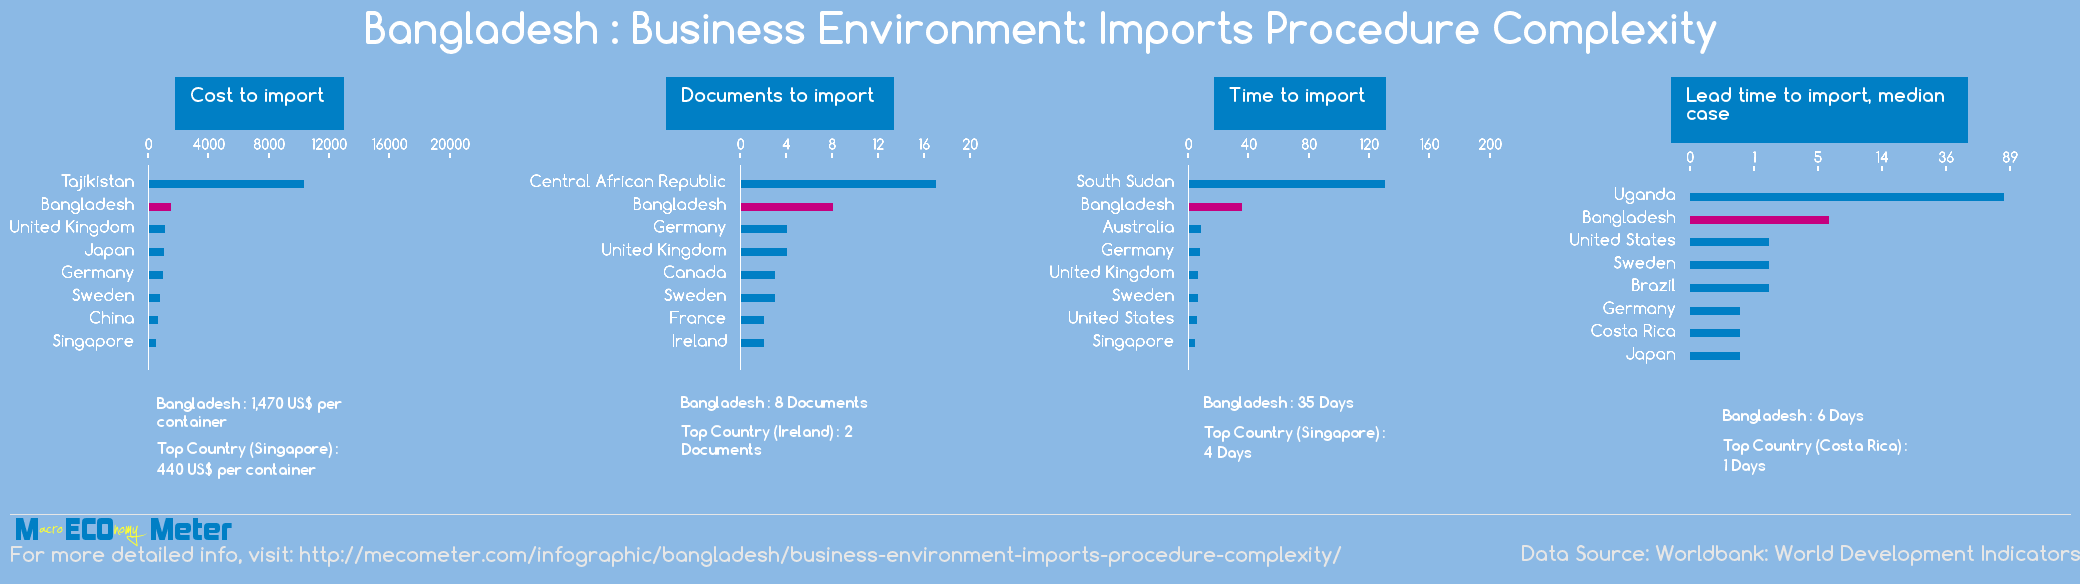 Bangladesh : Business Environment: Imports Procedure Complexity